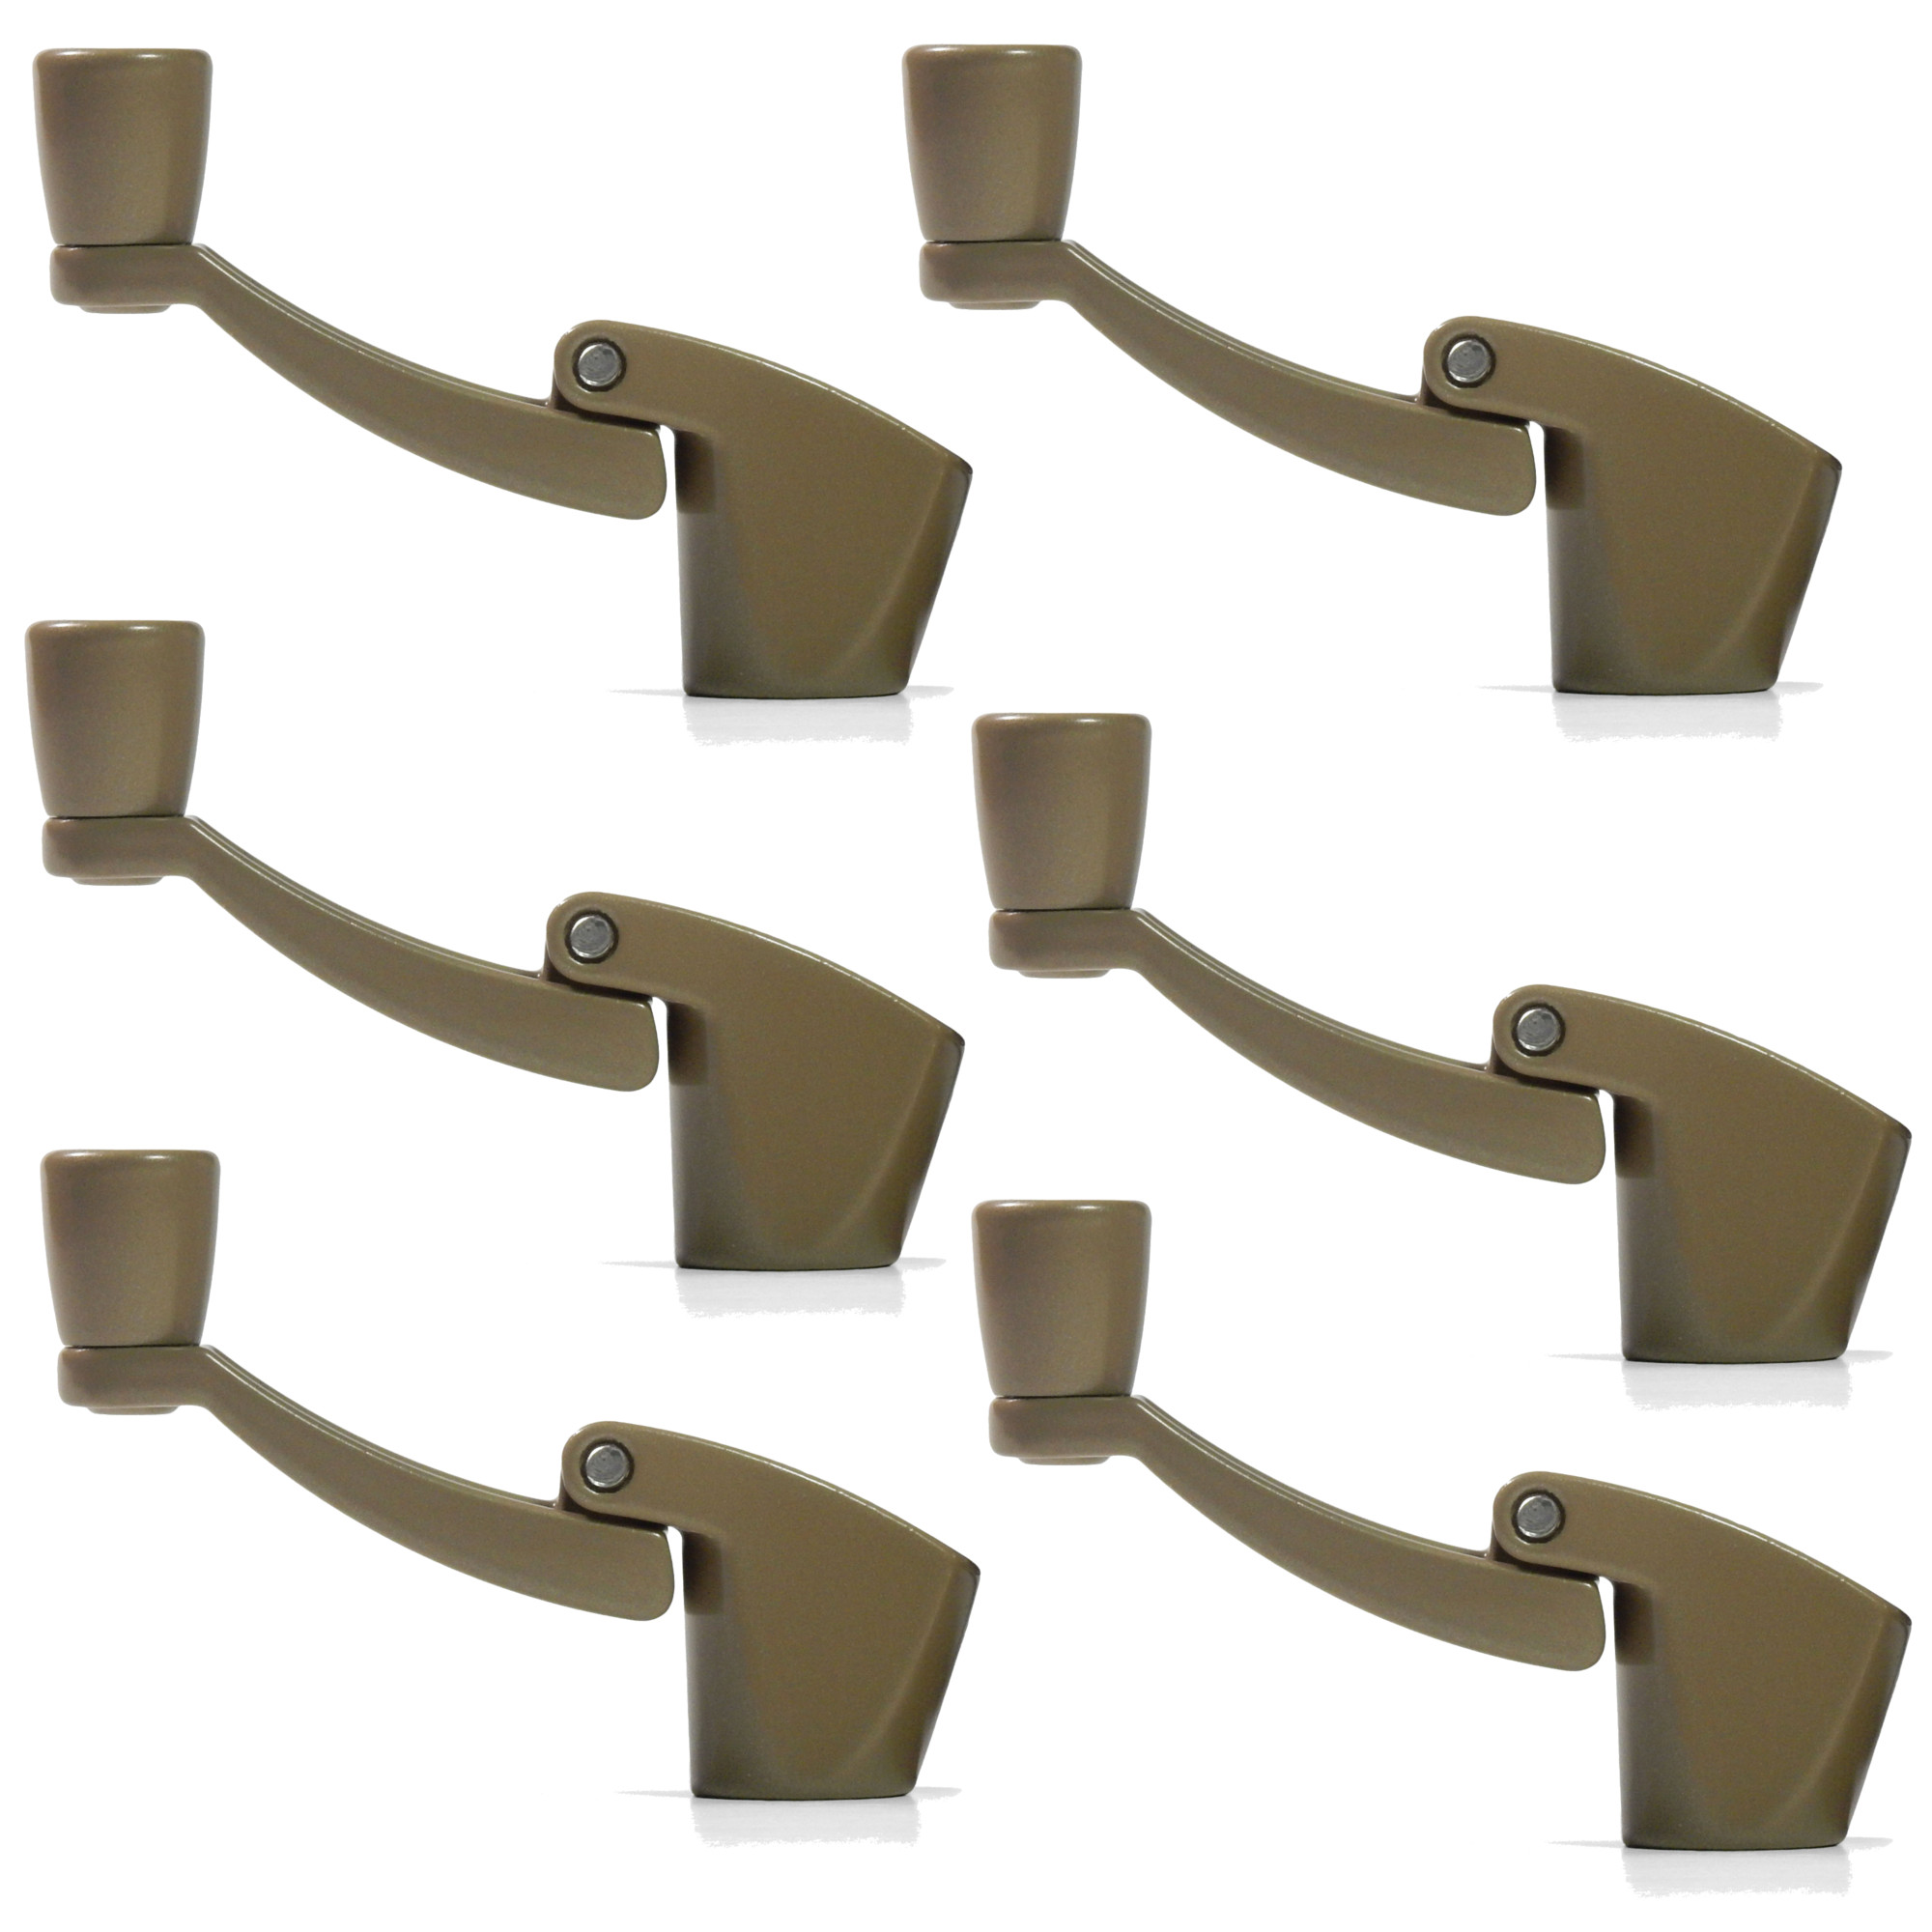 Ideal Security Inc. Fold Away Window Crank Handles in Bronze Finish (6-pack)